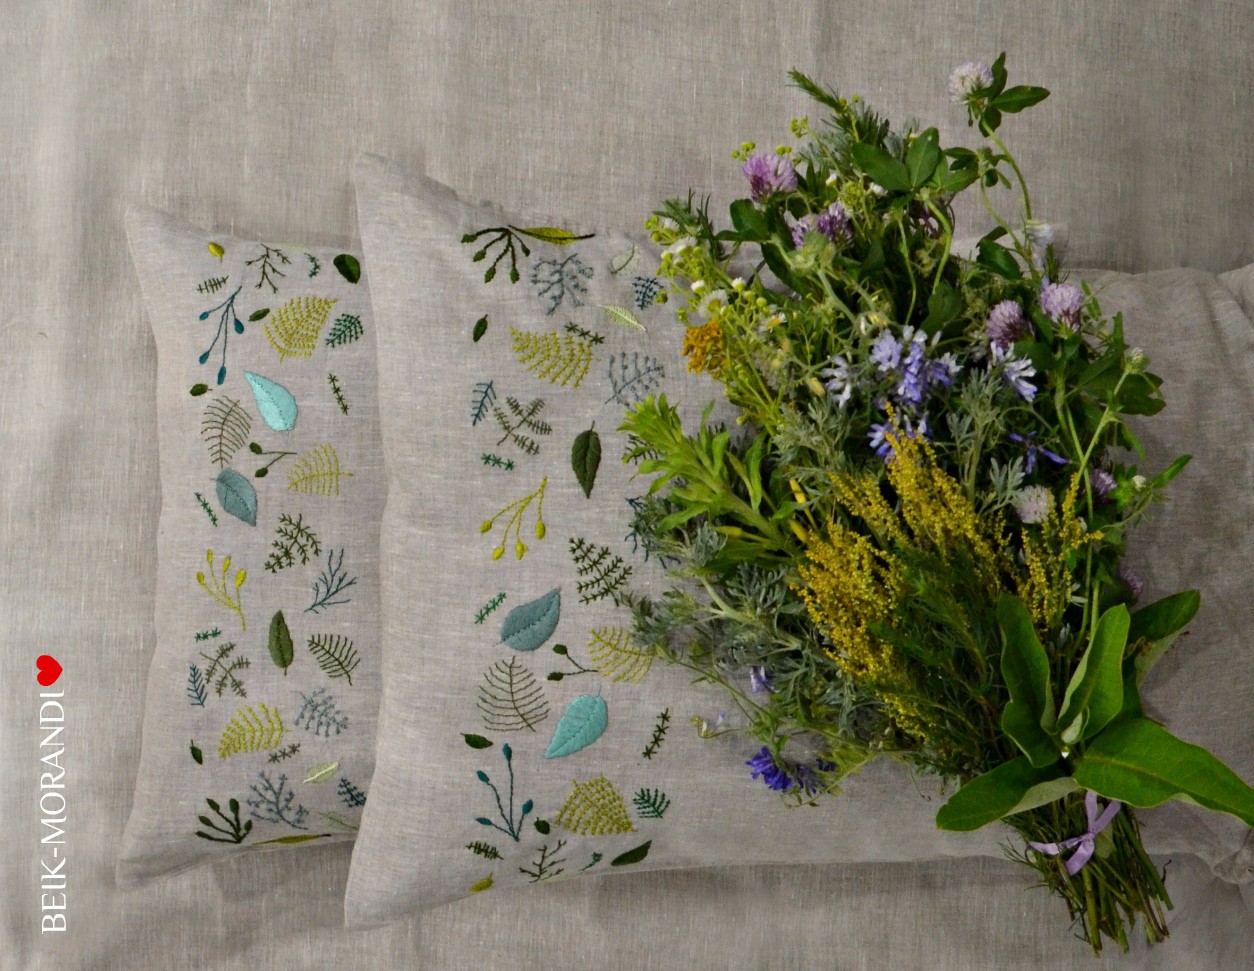 Linen Pillow Case With Handmade Embroidery